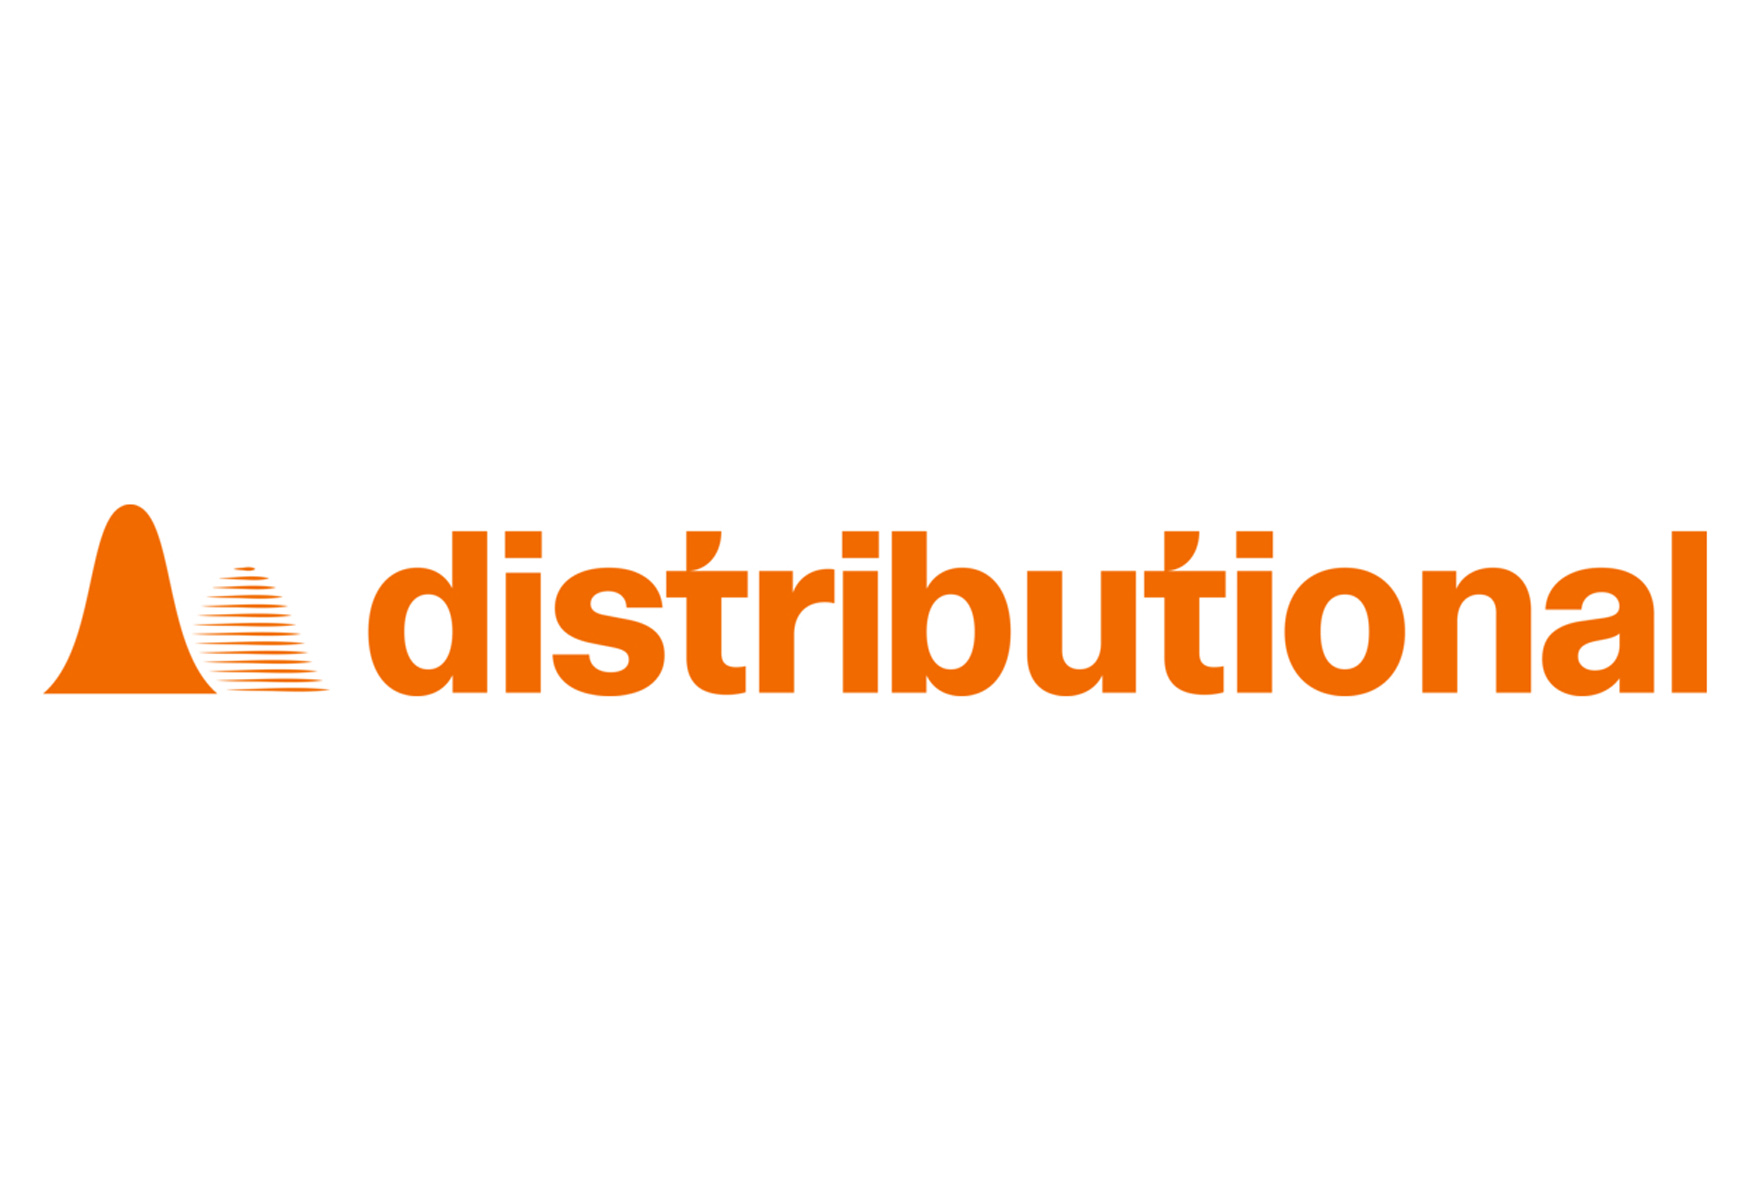 Distributional Aims To Develop Software To Reduce AI Risk